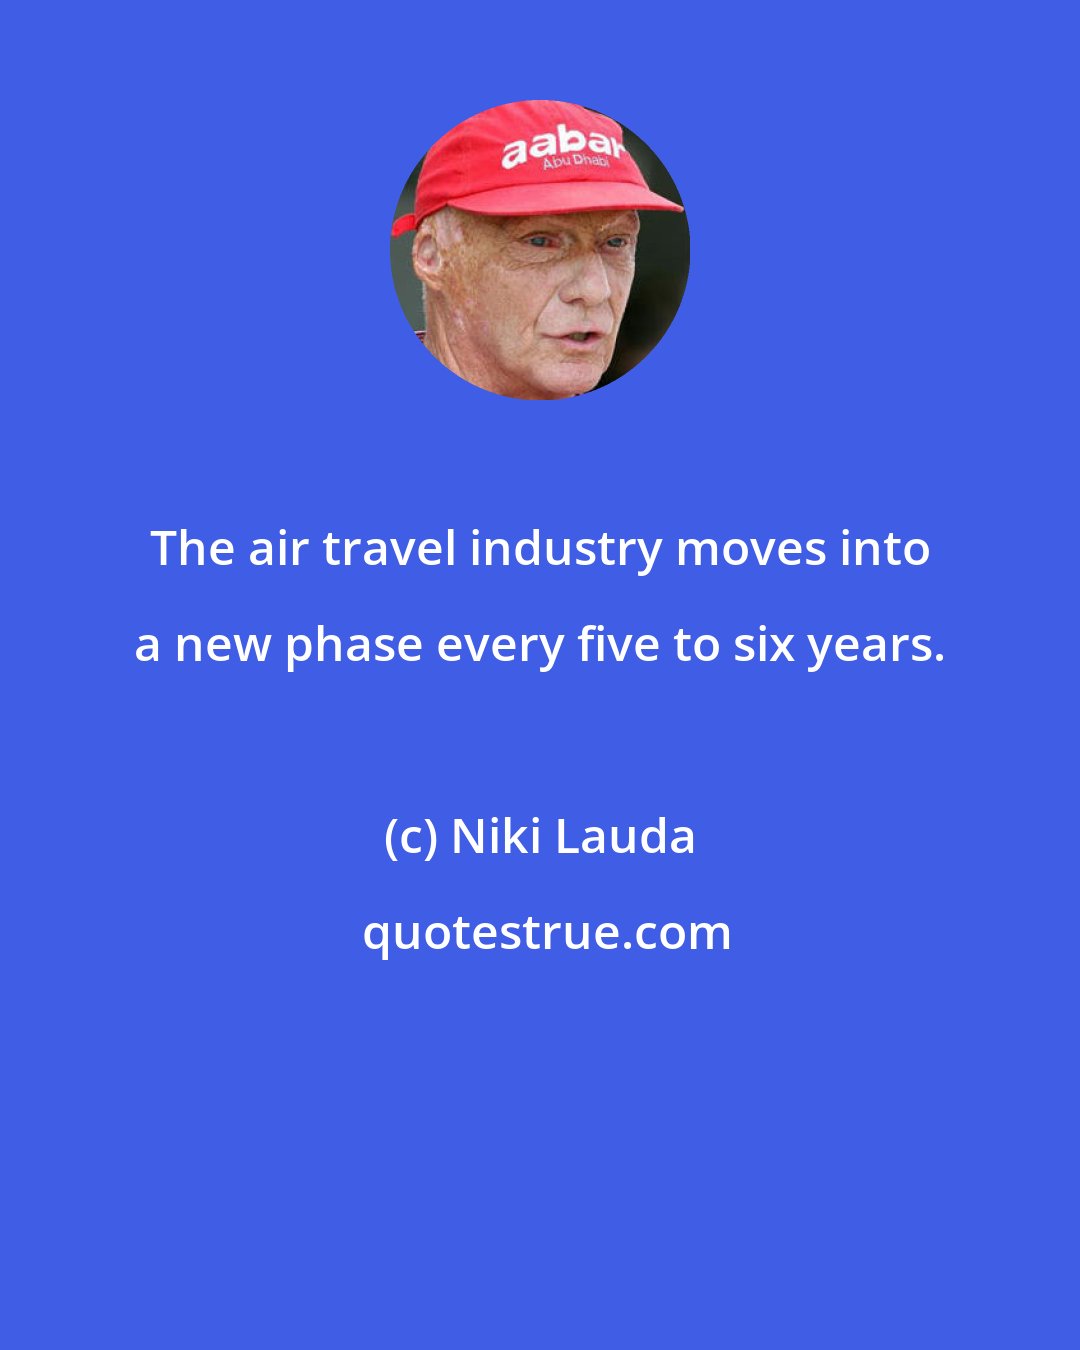 Niki Lauda: The air travel industry moves into a new phase every five to six years.